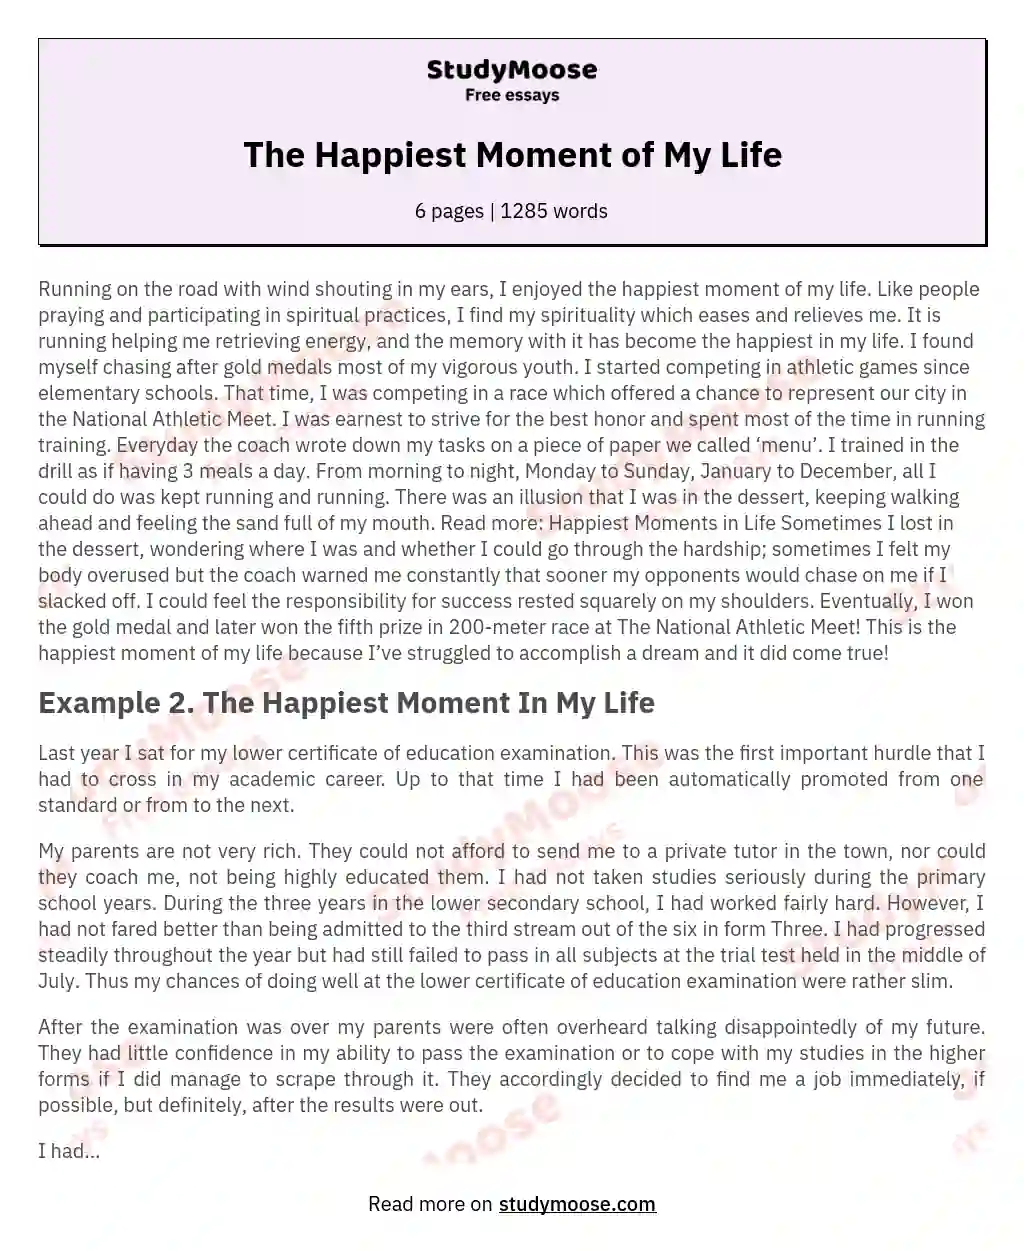 The Happiest Moment of My Life essay